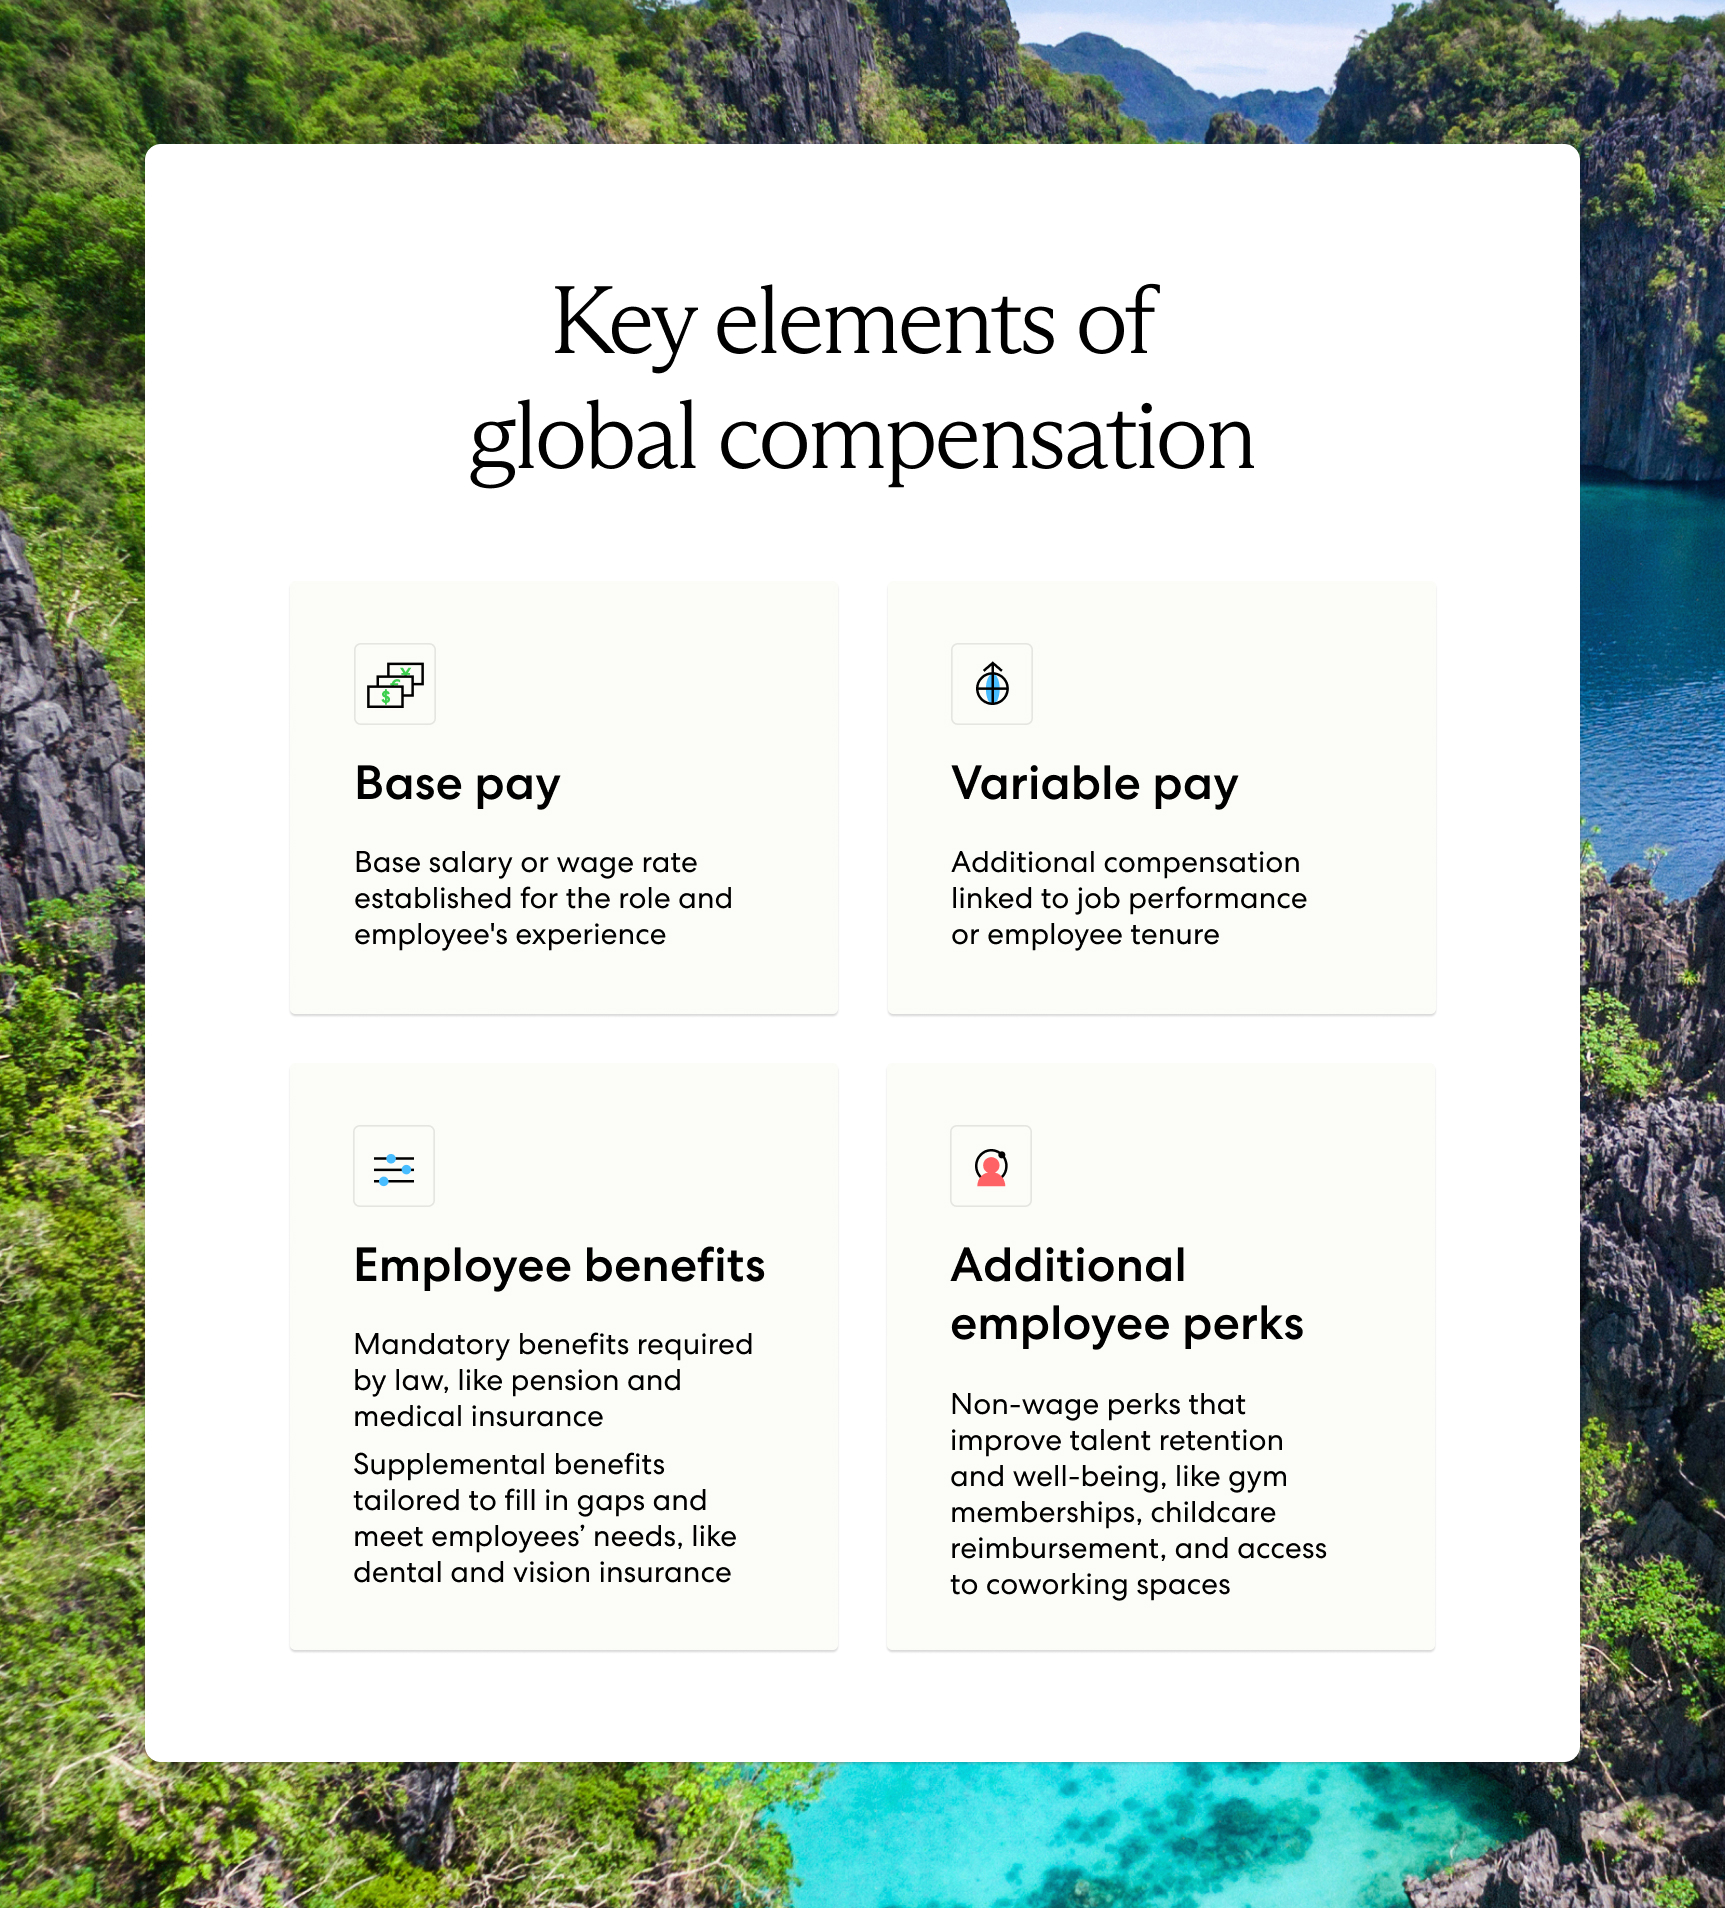 Chart detailing the key elements of global compensation for employers